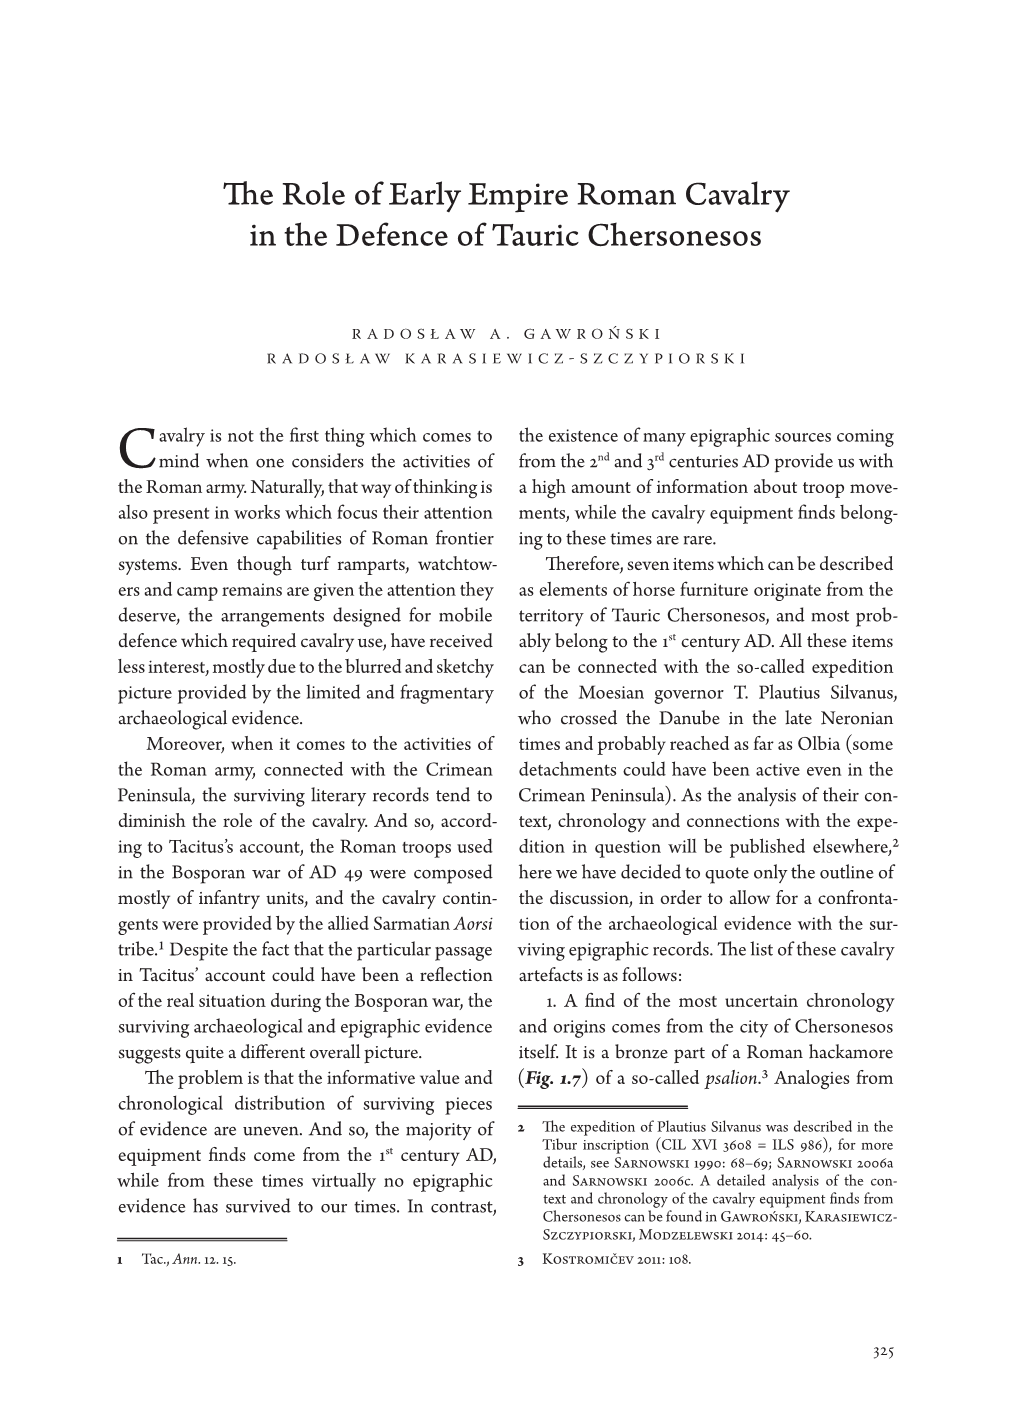 The Role of Early Empire Roman Cavalry in the Defence of Tauric Chersonesos